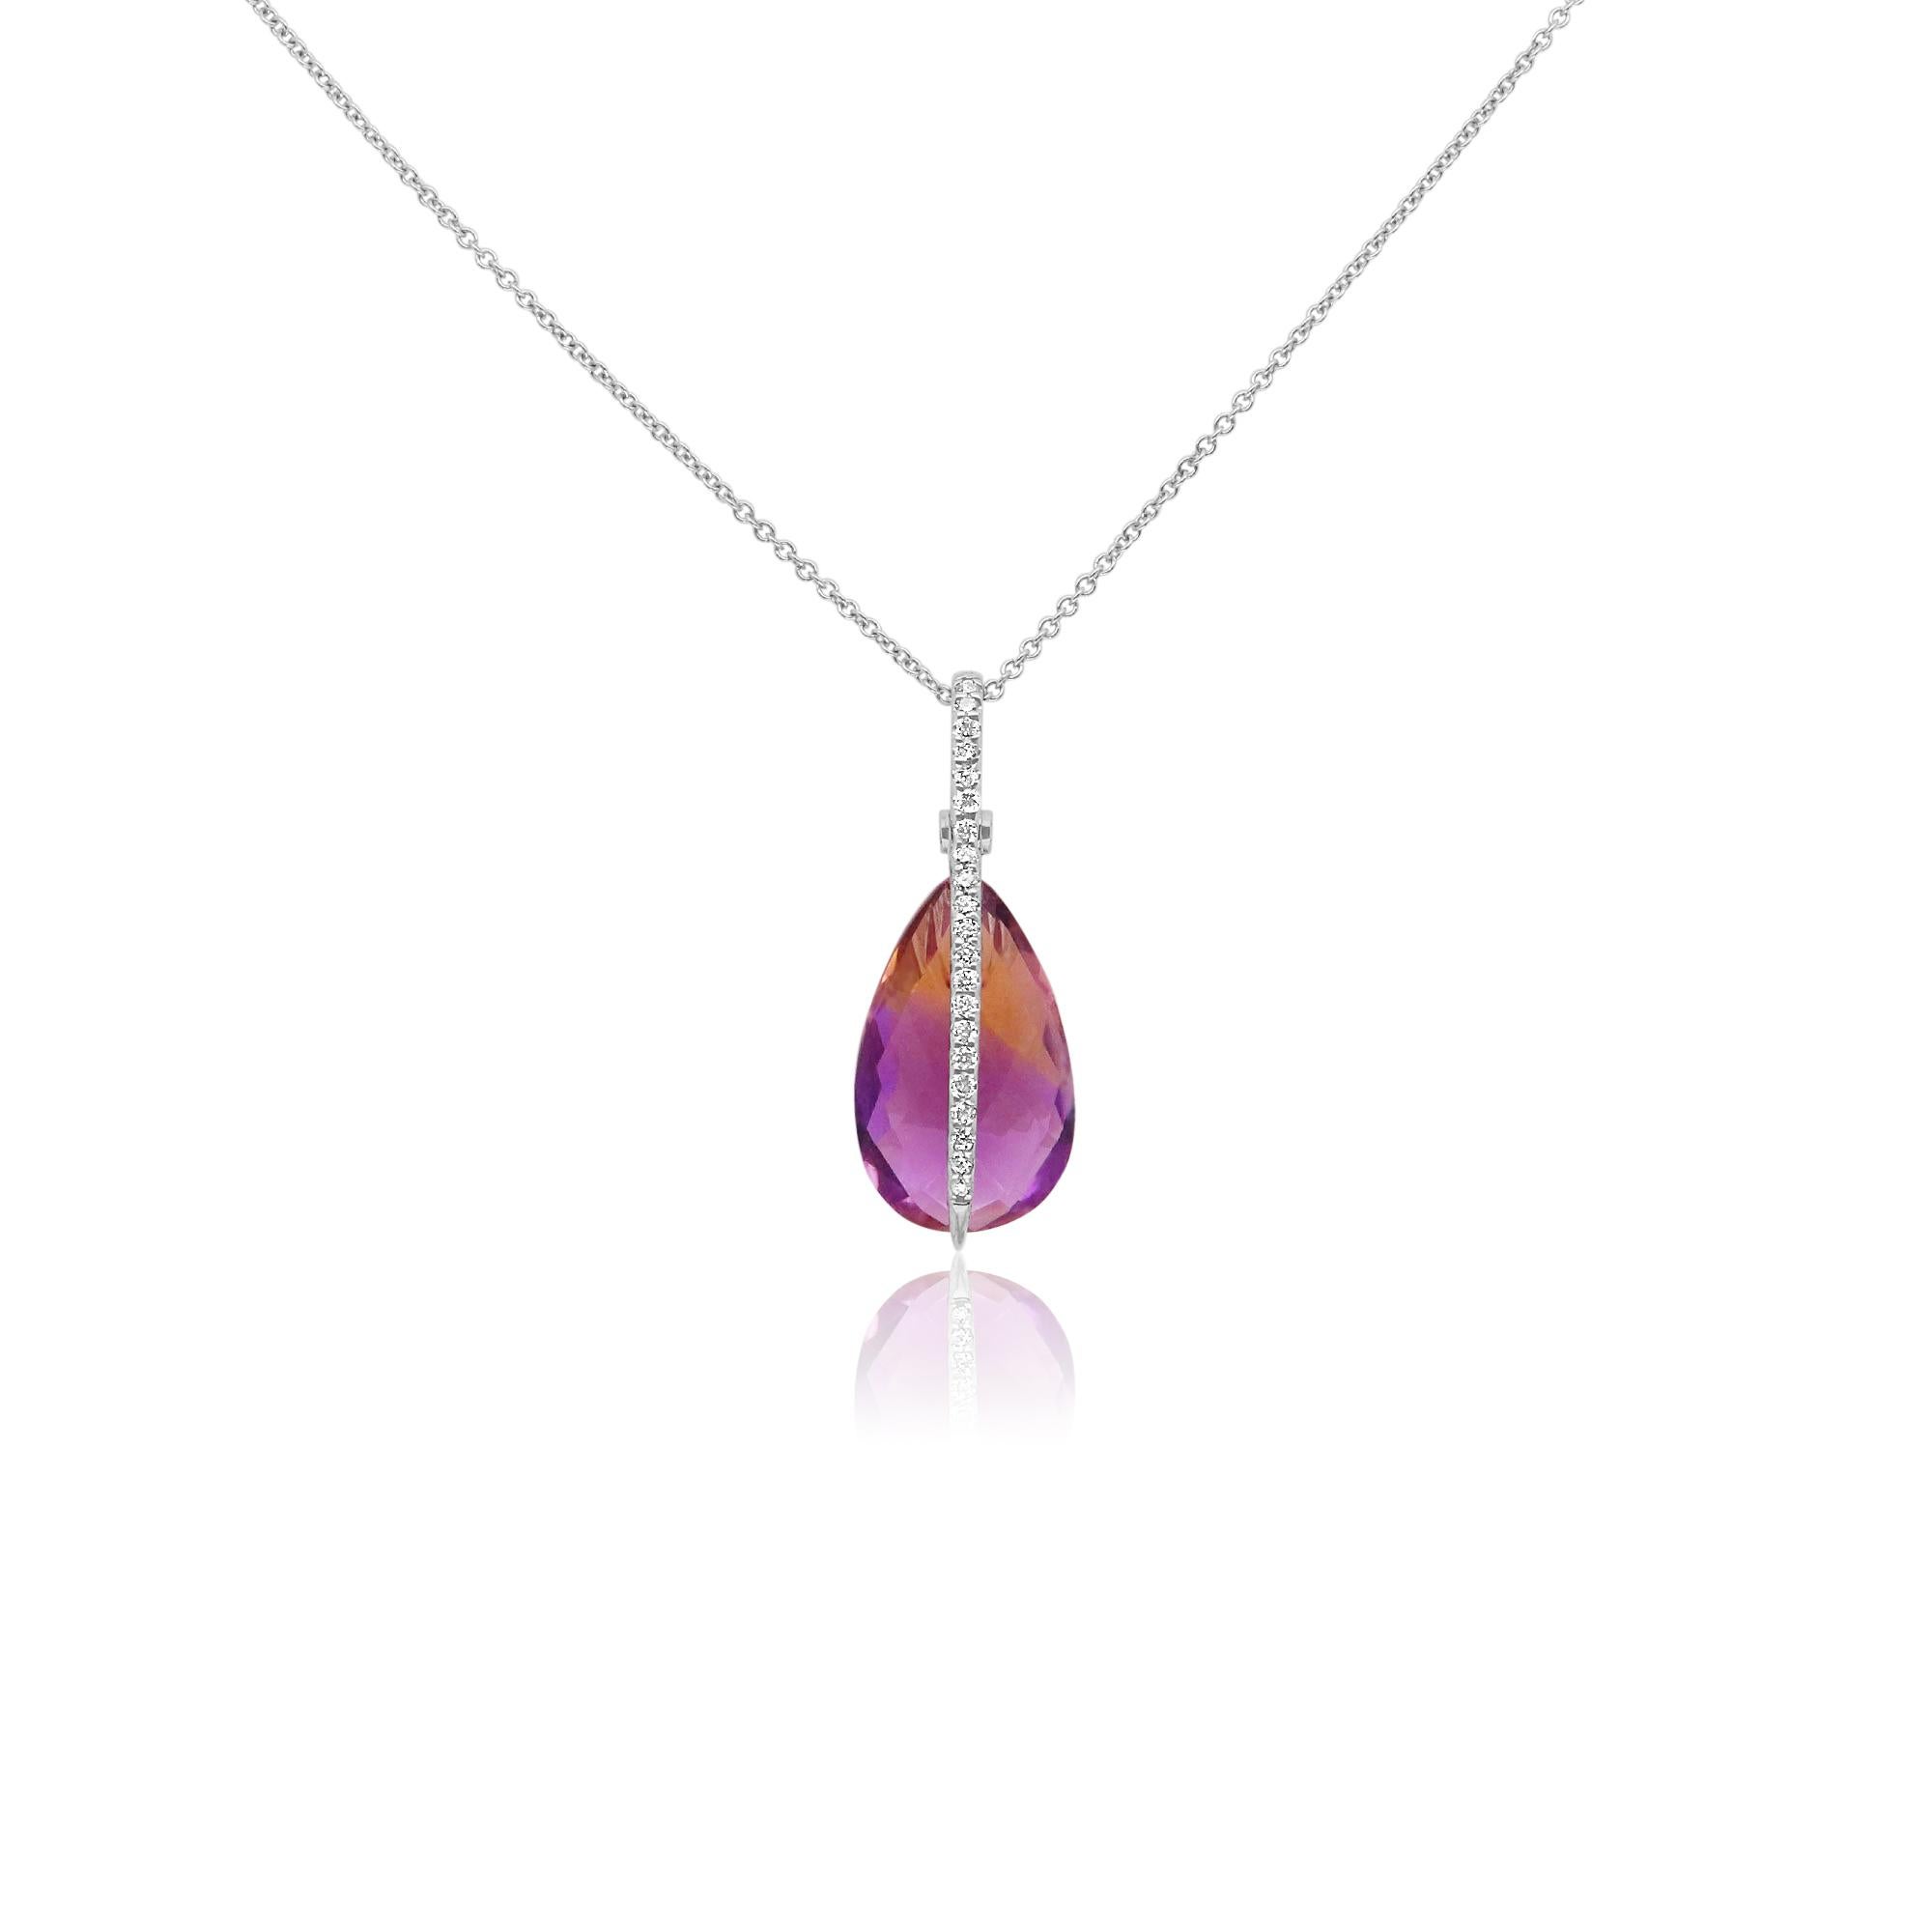 Material: 14K White Gold
Stone Details: 1 Pear Shaped Bi-Color Ametrine at 6.55 Carats - Measuring 16.9 x 10.5 mm
Diamond Details: Brilliant Round White Diamonds at 0.23 Carats- Clarity: SI / Color H-I

Fine one-of-a-kind craftsmanship meets